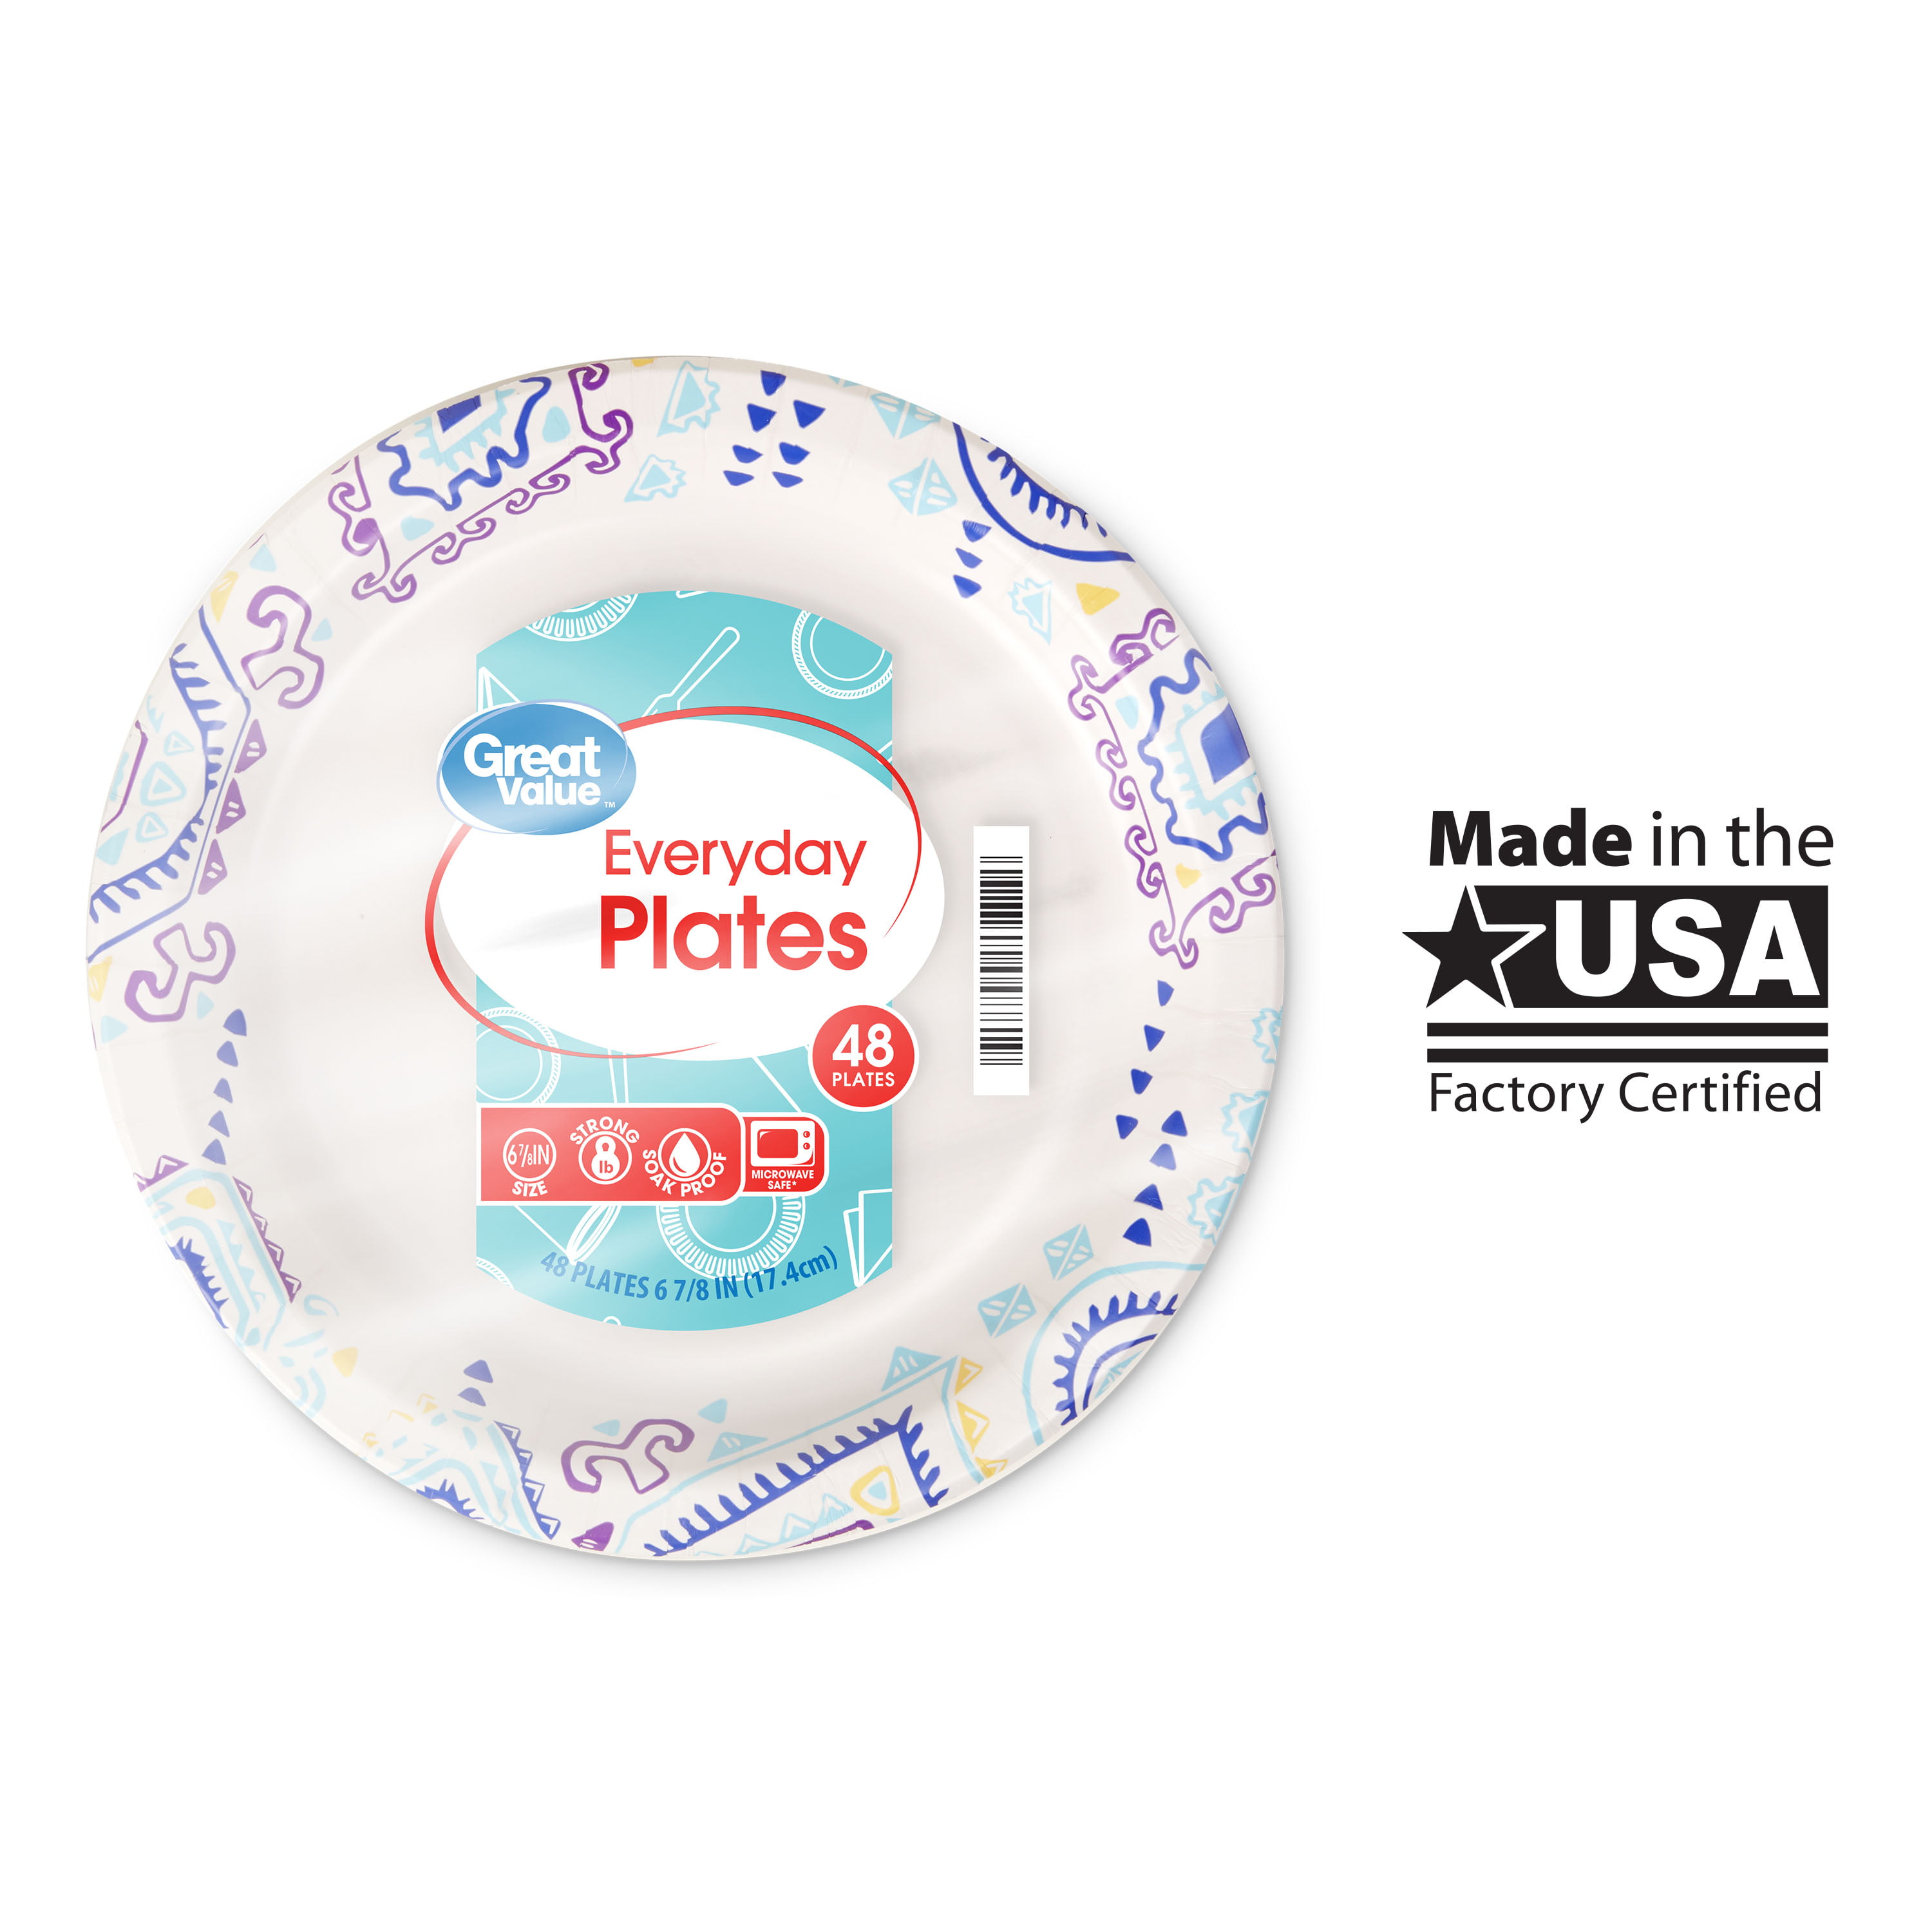 Essential Everyday 6.87 Inches Dailyware Paper Plates 48 Plates 48